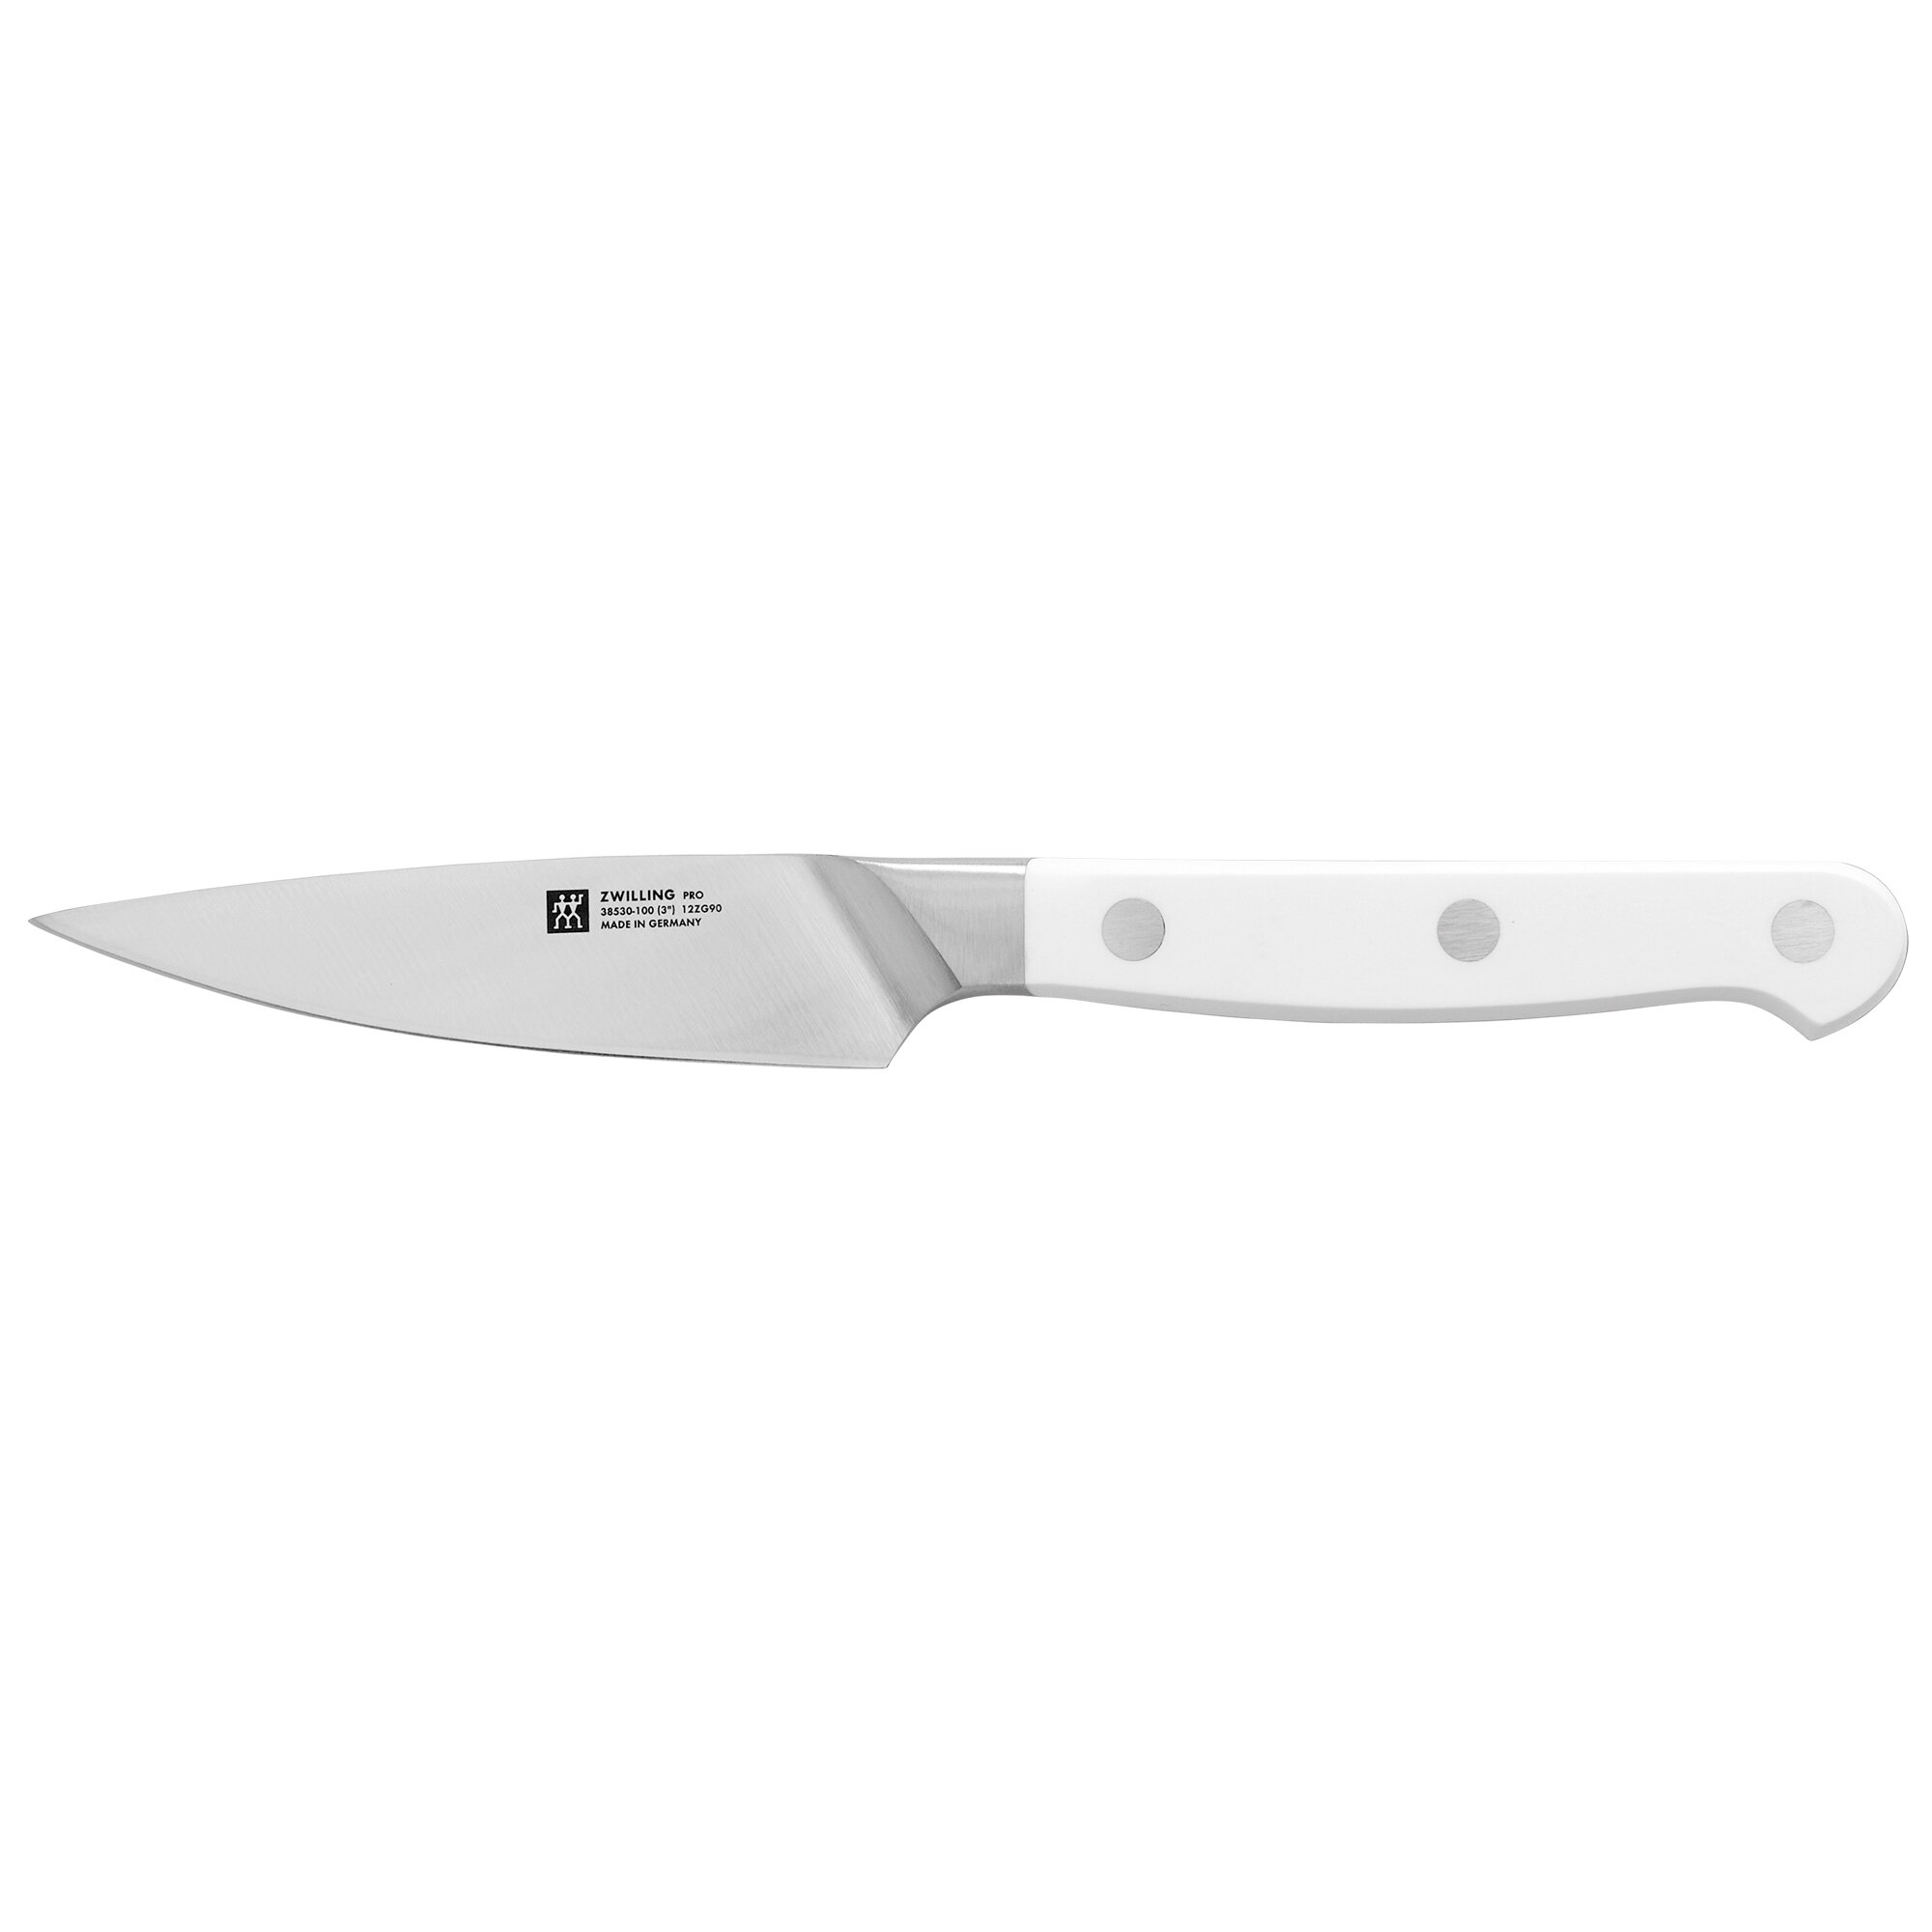 Kitchen Tool, ICEL 4-inch Serrated Paring Knife, Green 